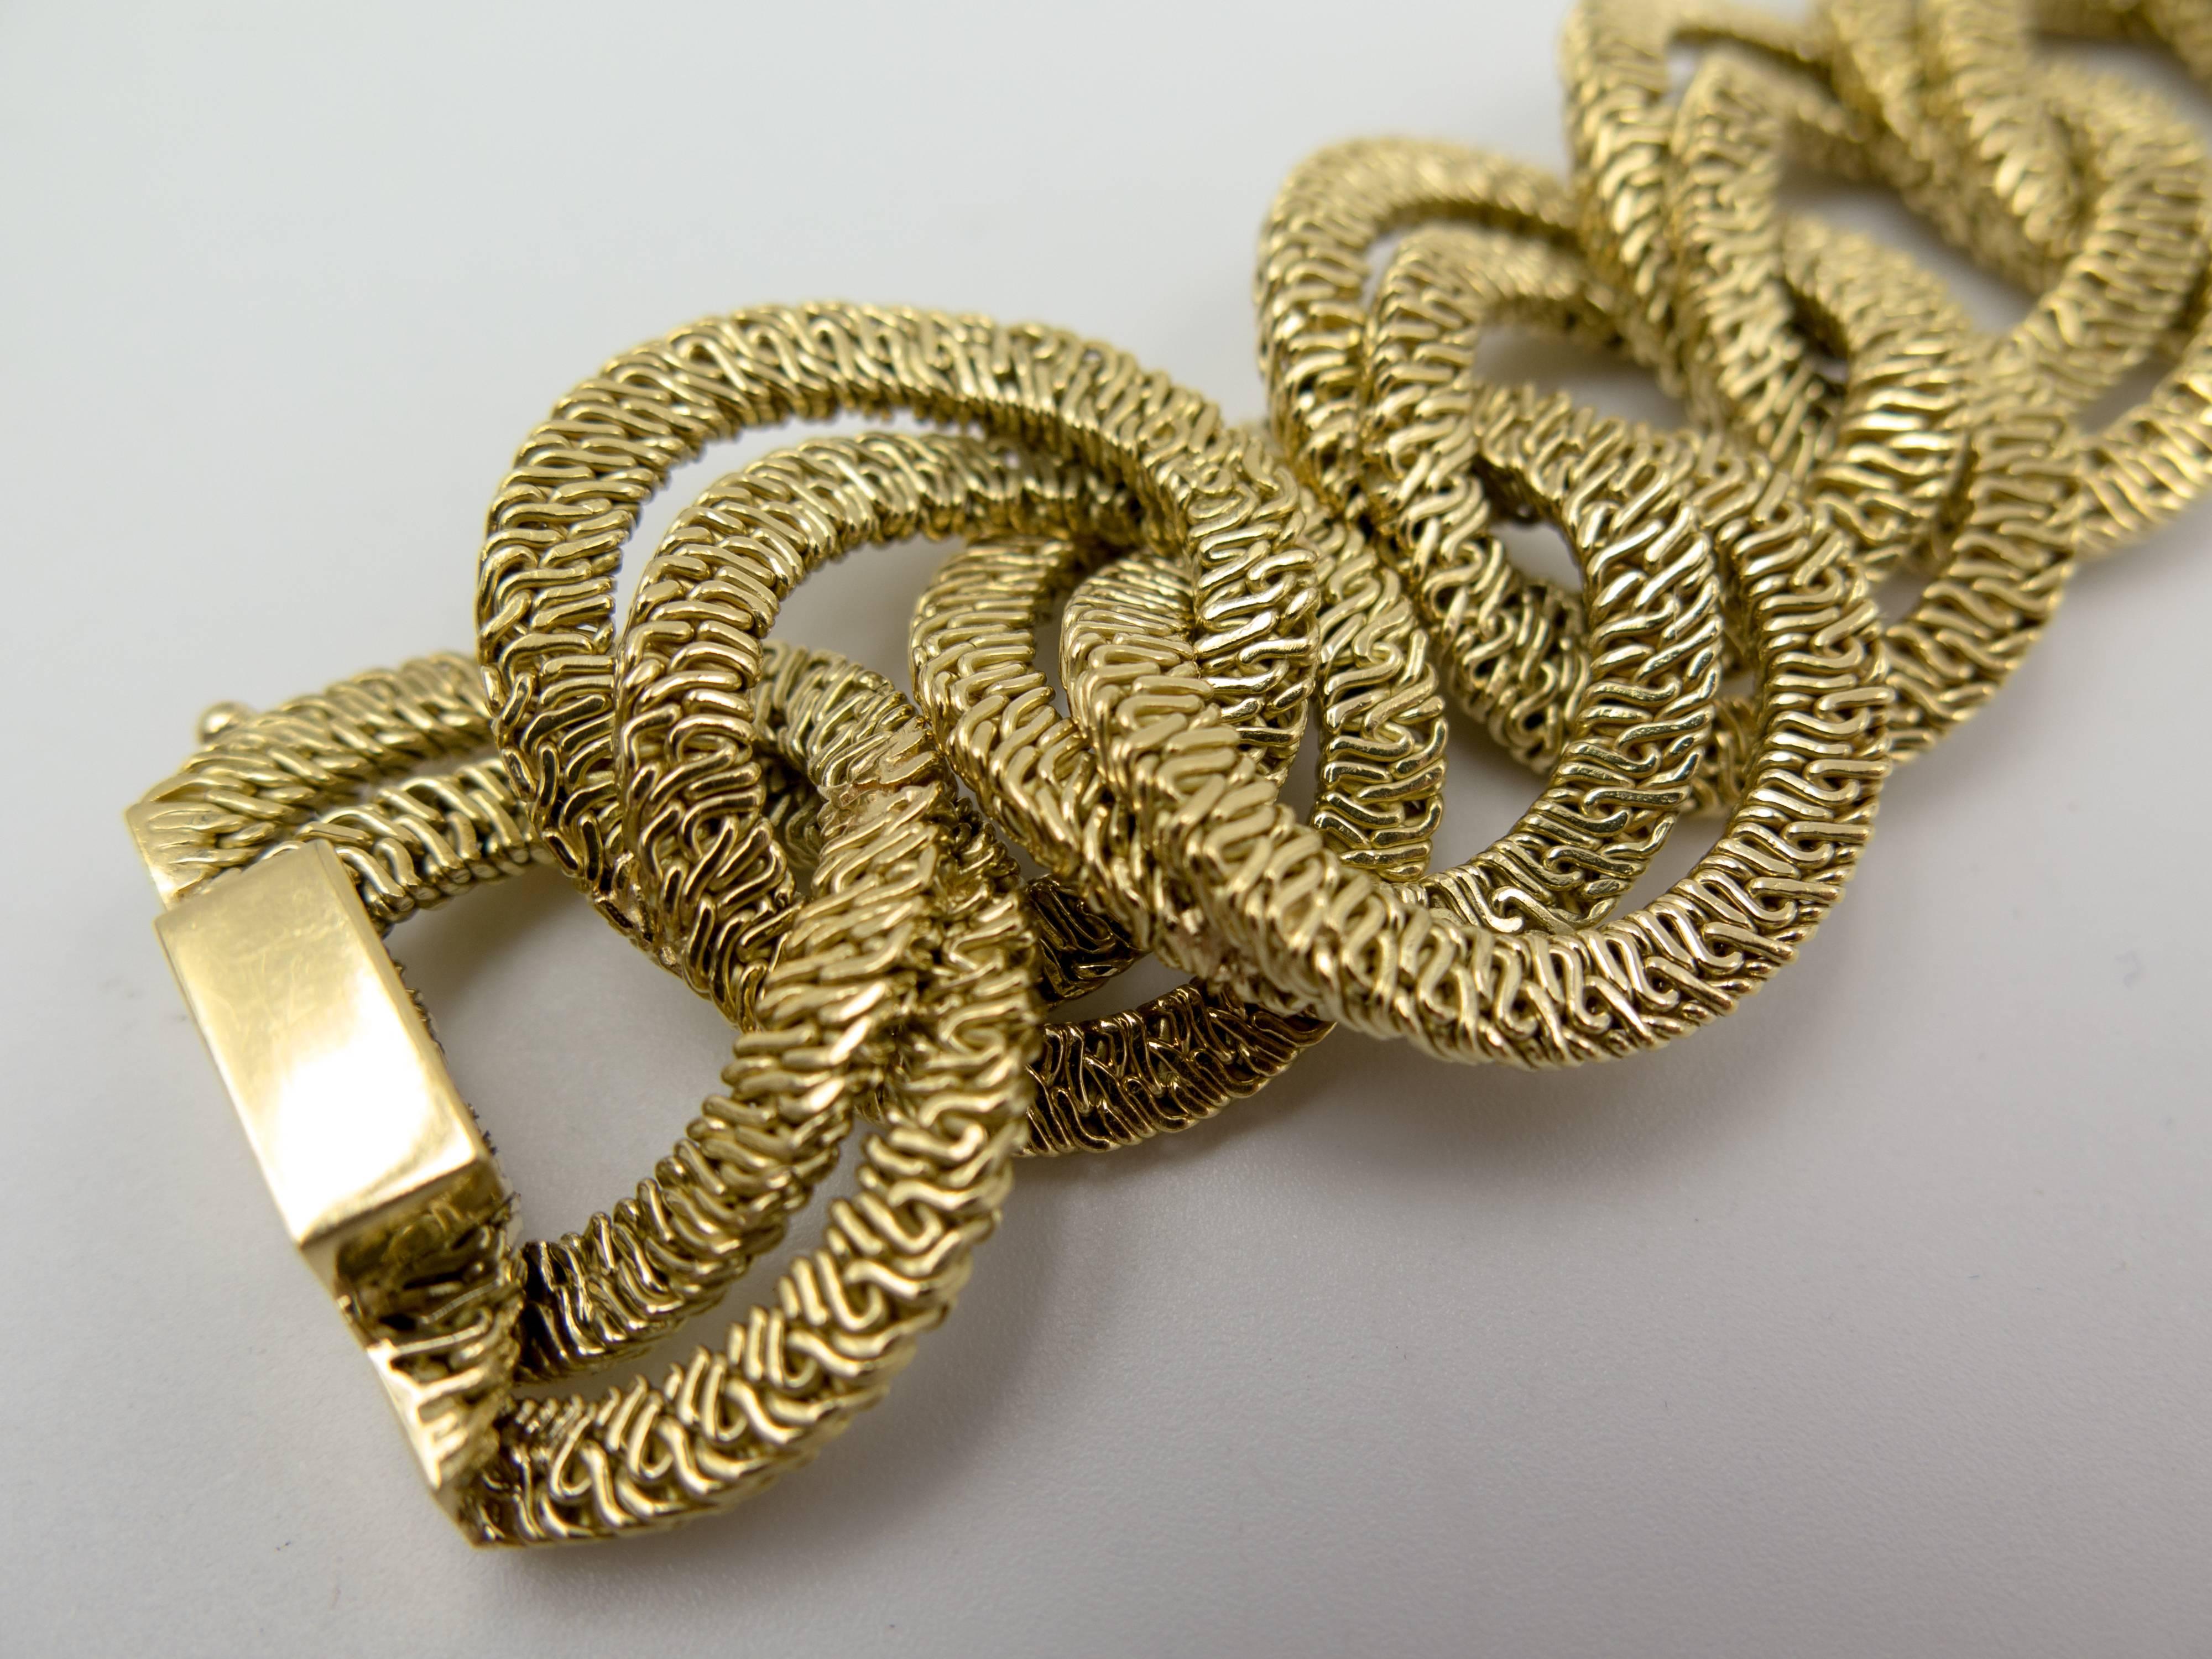 An elegant and extremely wearable gold bracelet to be worn day and night, destined to become someone's signature jewel.  Each link consists of tiny plaits of eighteen karat gold in curb link form, the bracelet measuring 8 1/4 " in length. 